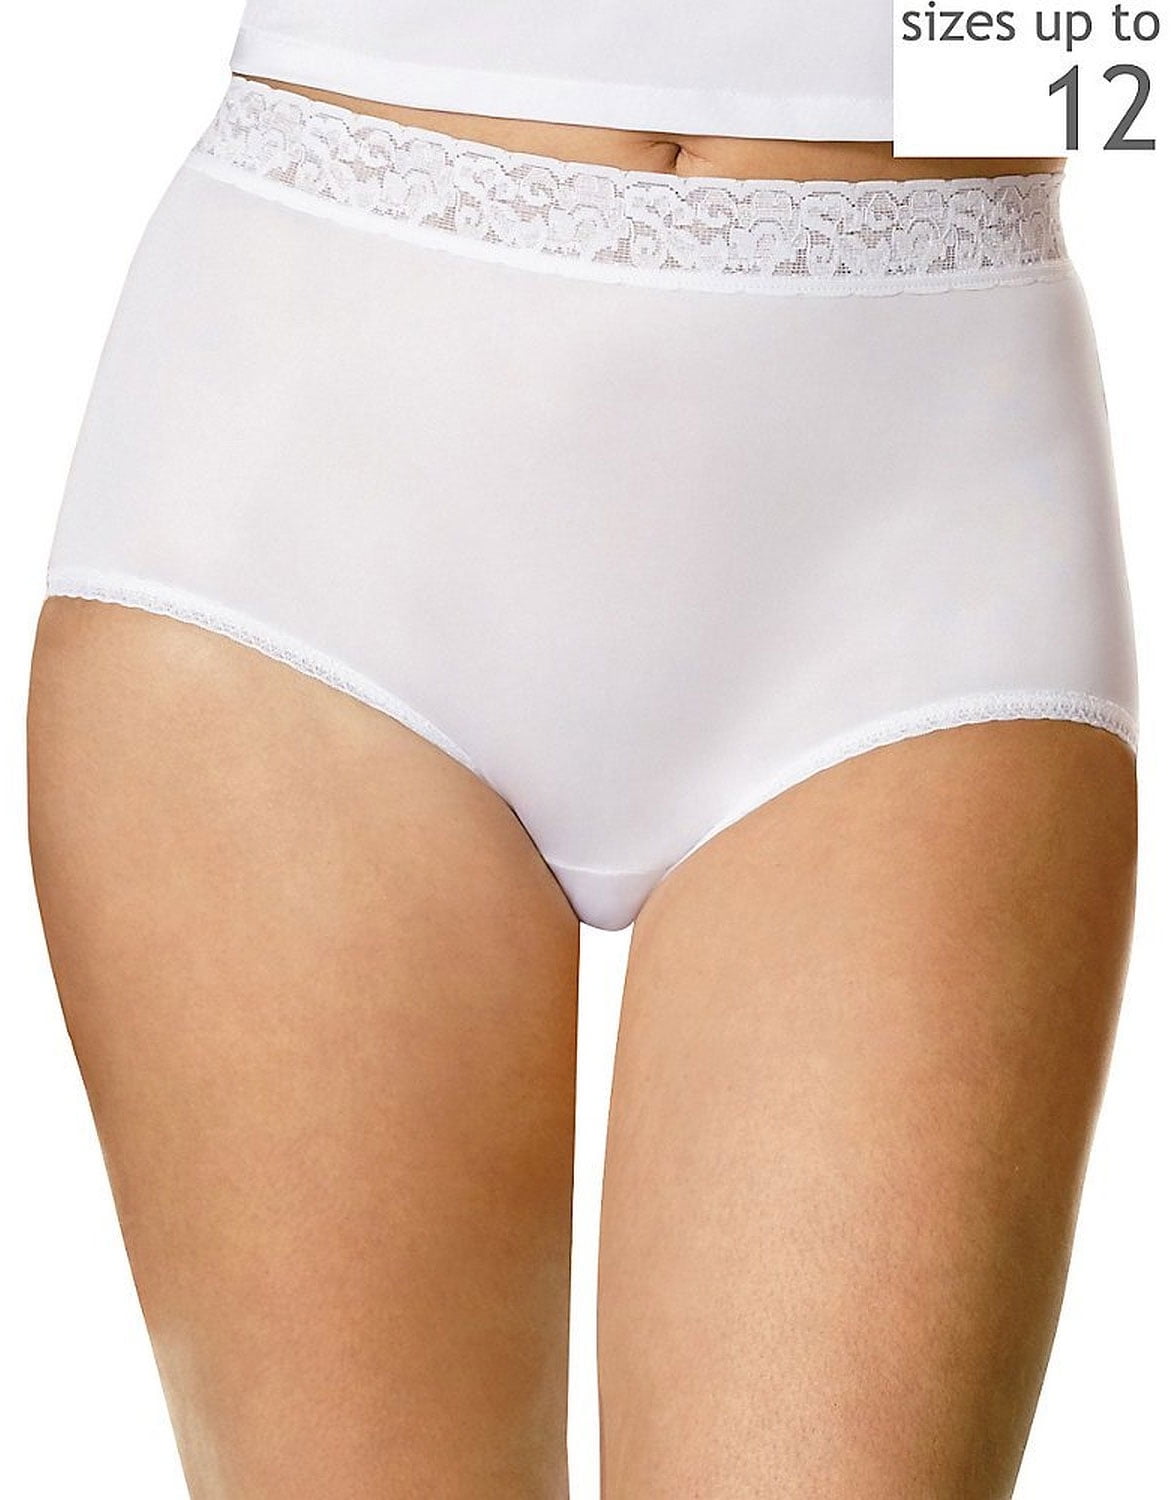 ladies 5 pack ex top store white high leg briefs for just £5.00 